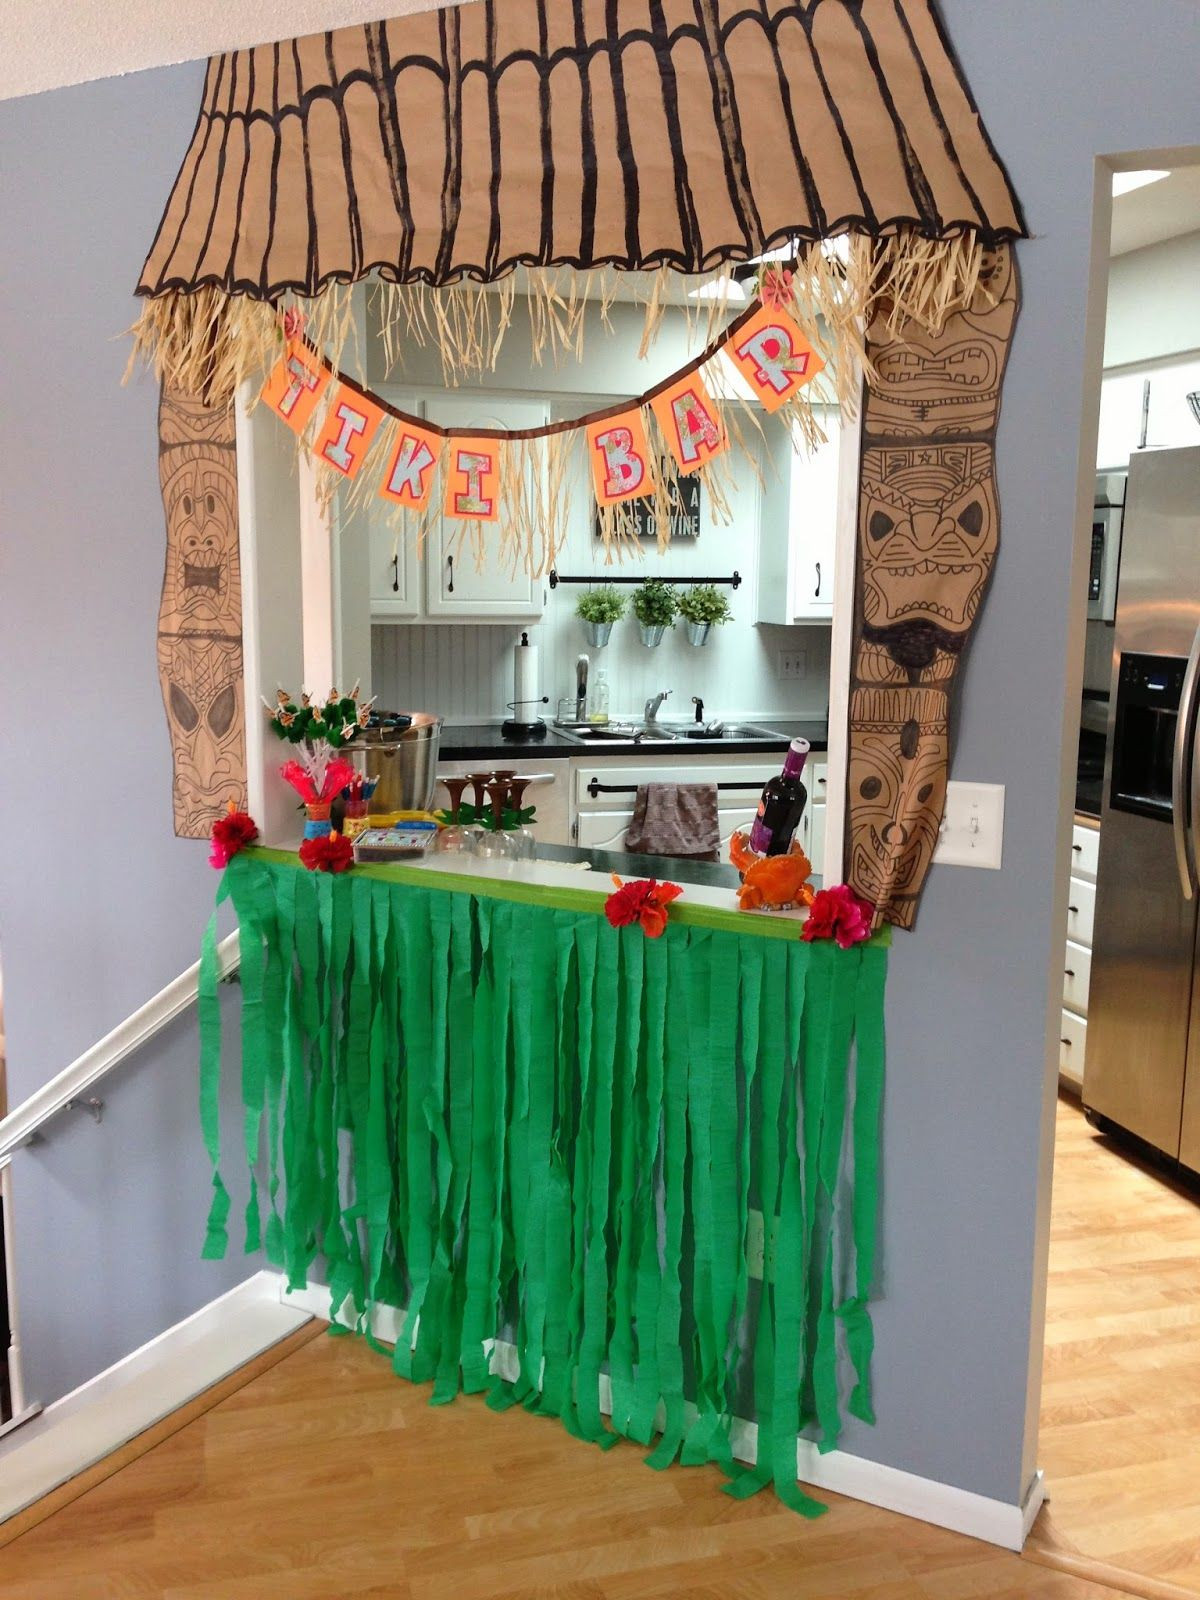 Inexpensive DIY Luau Party Decorations
 This grass skirt is easy and inexpensive to make It can